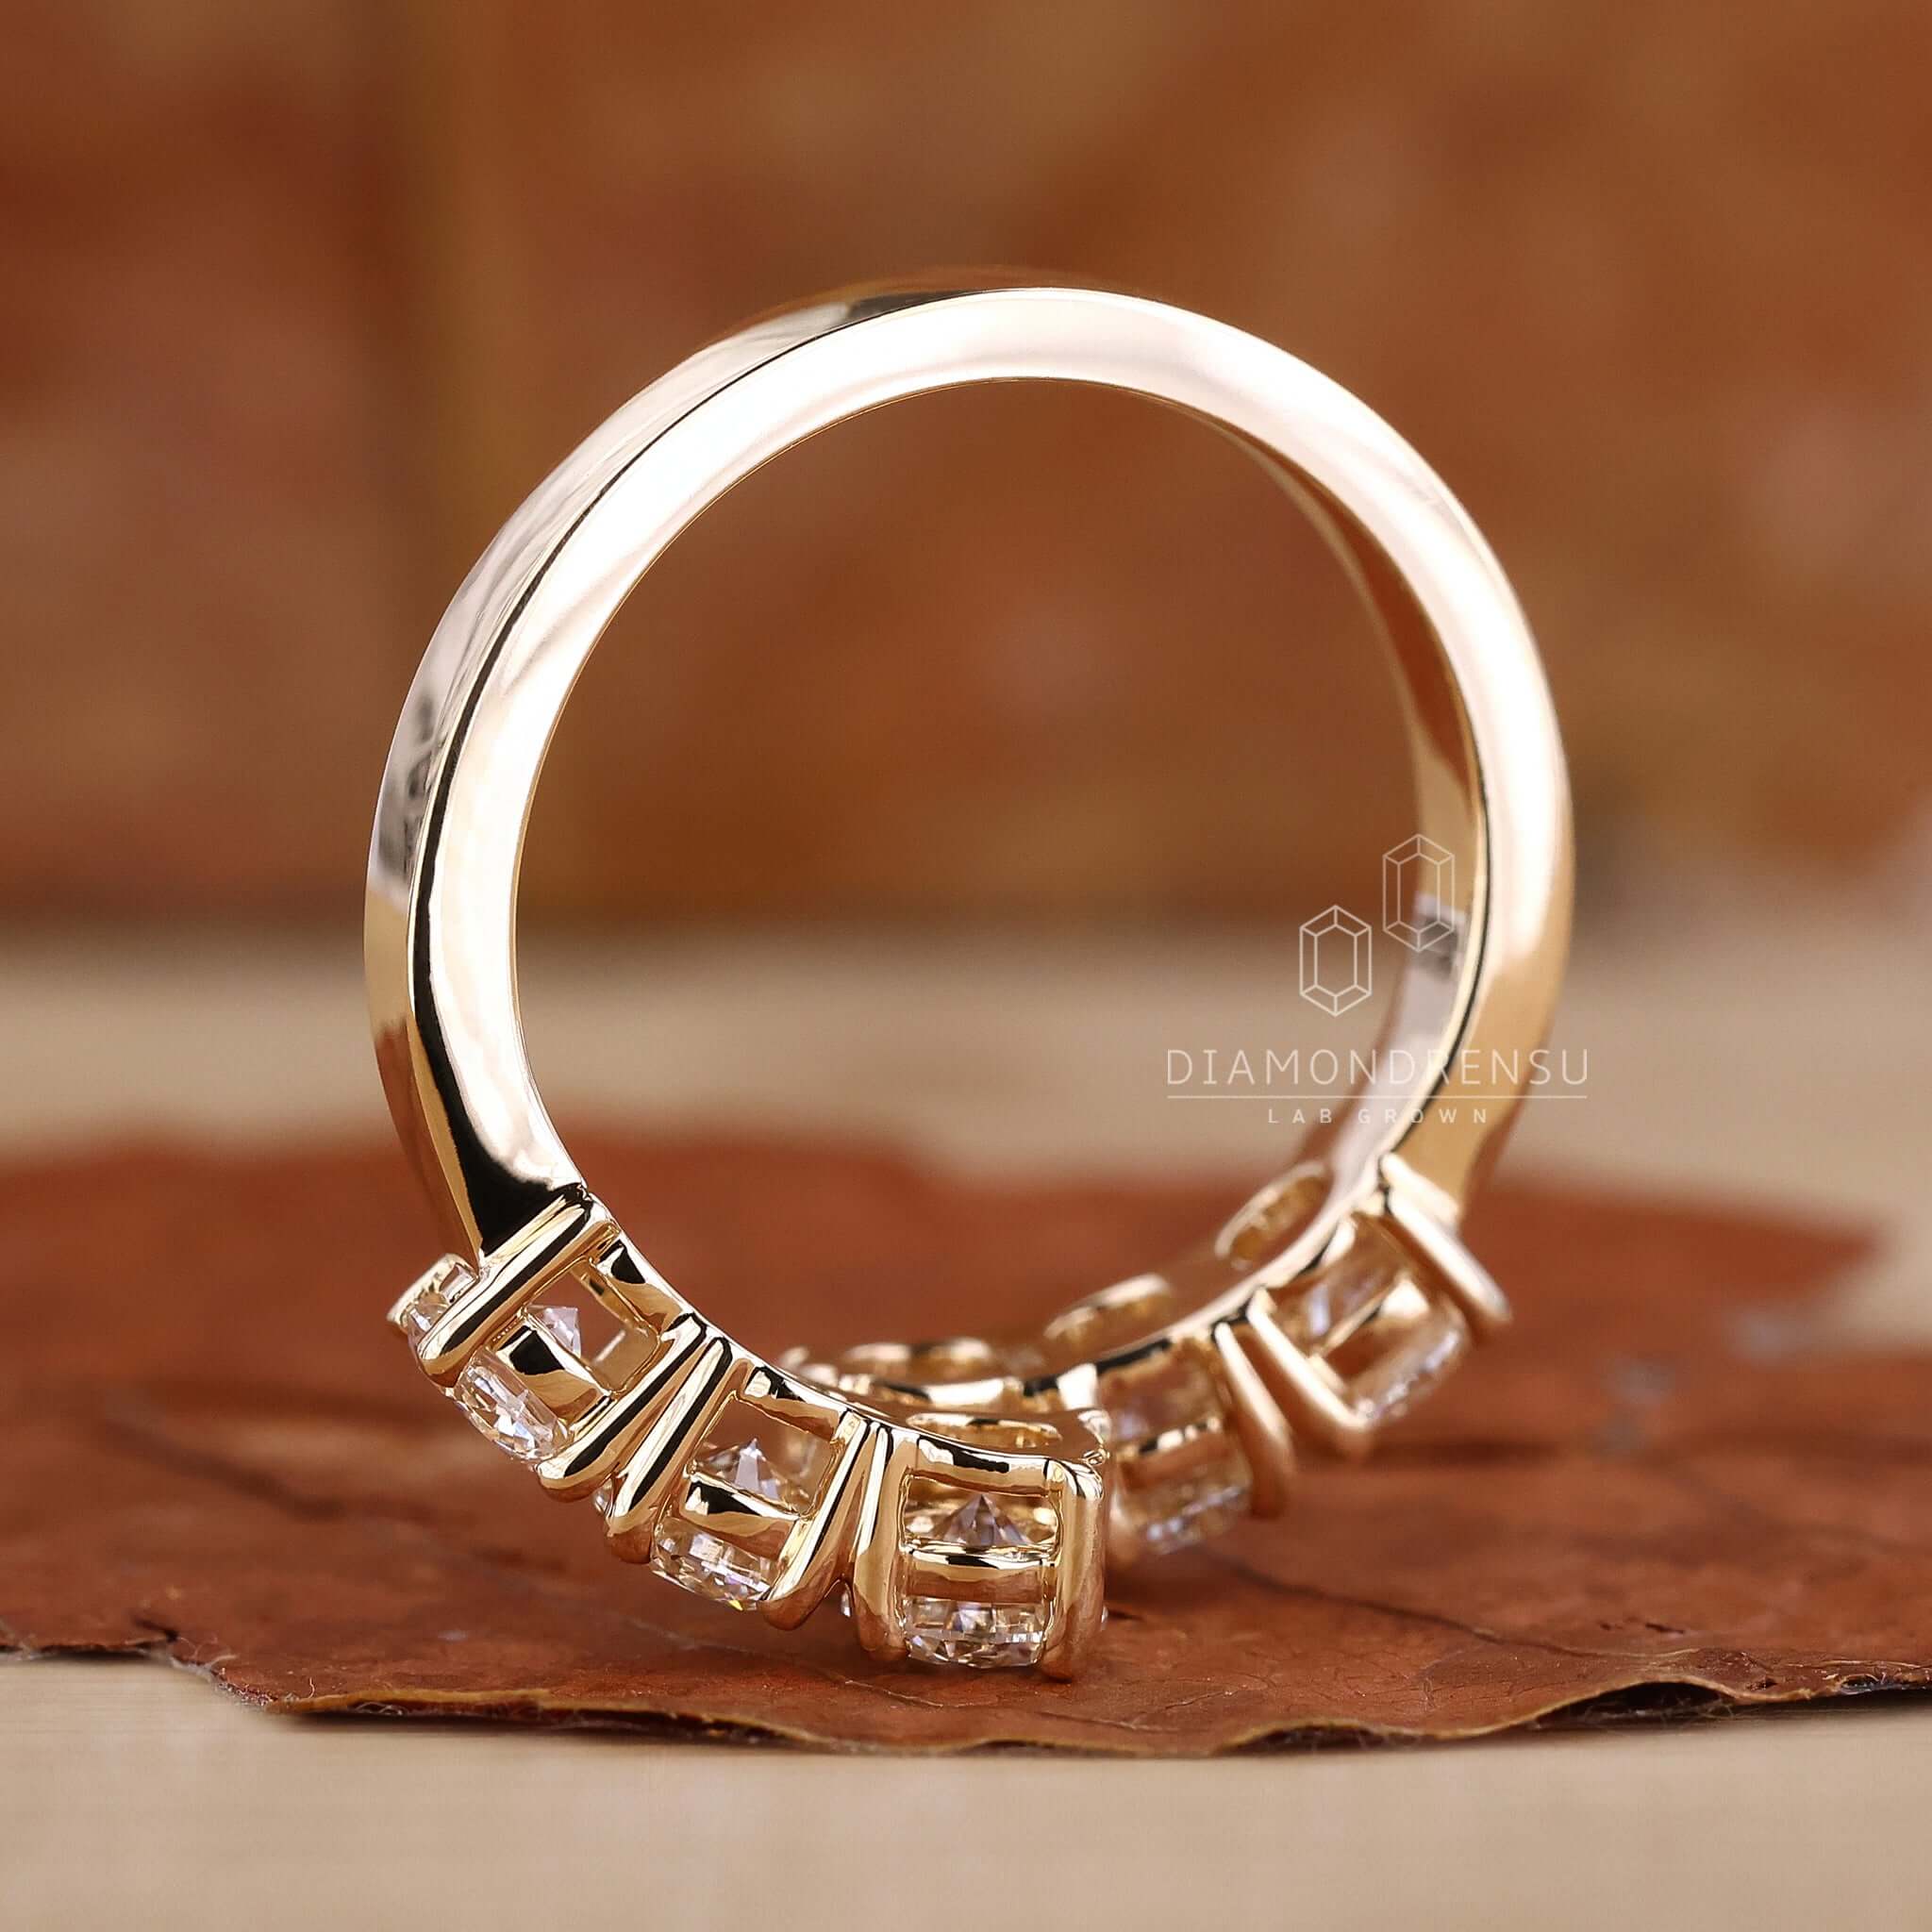 Collection of women's lab-grown diamond rings, showcasing ethical and stunning designs.